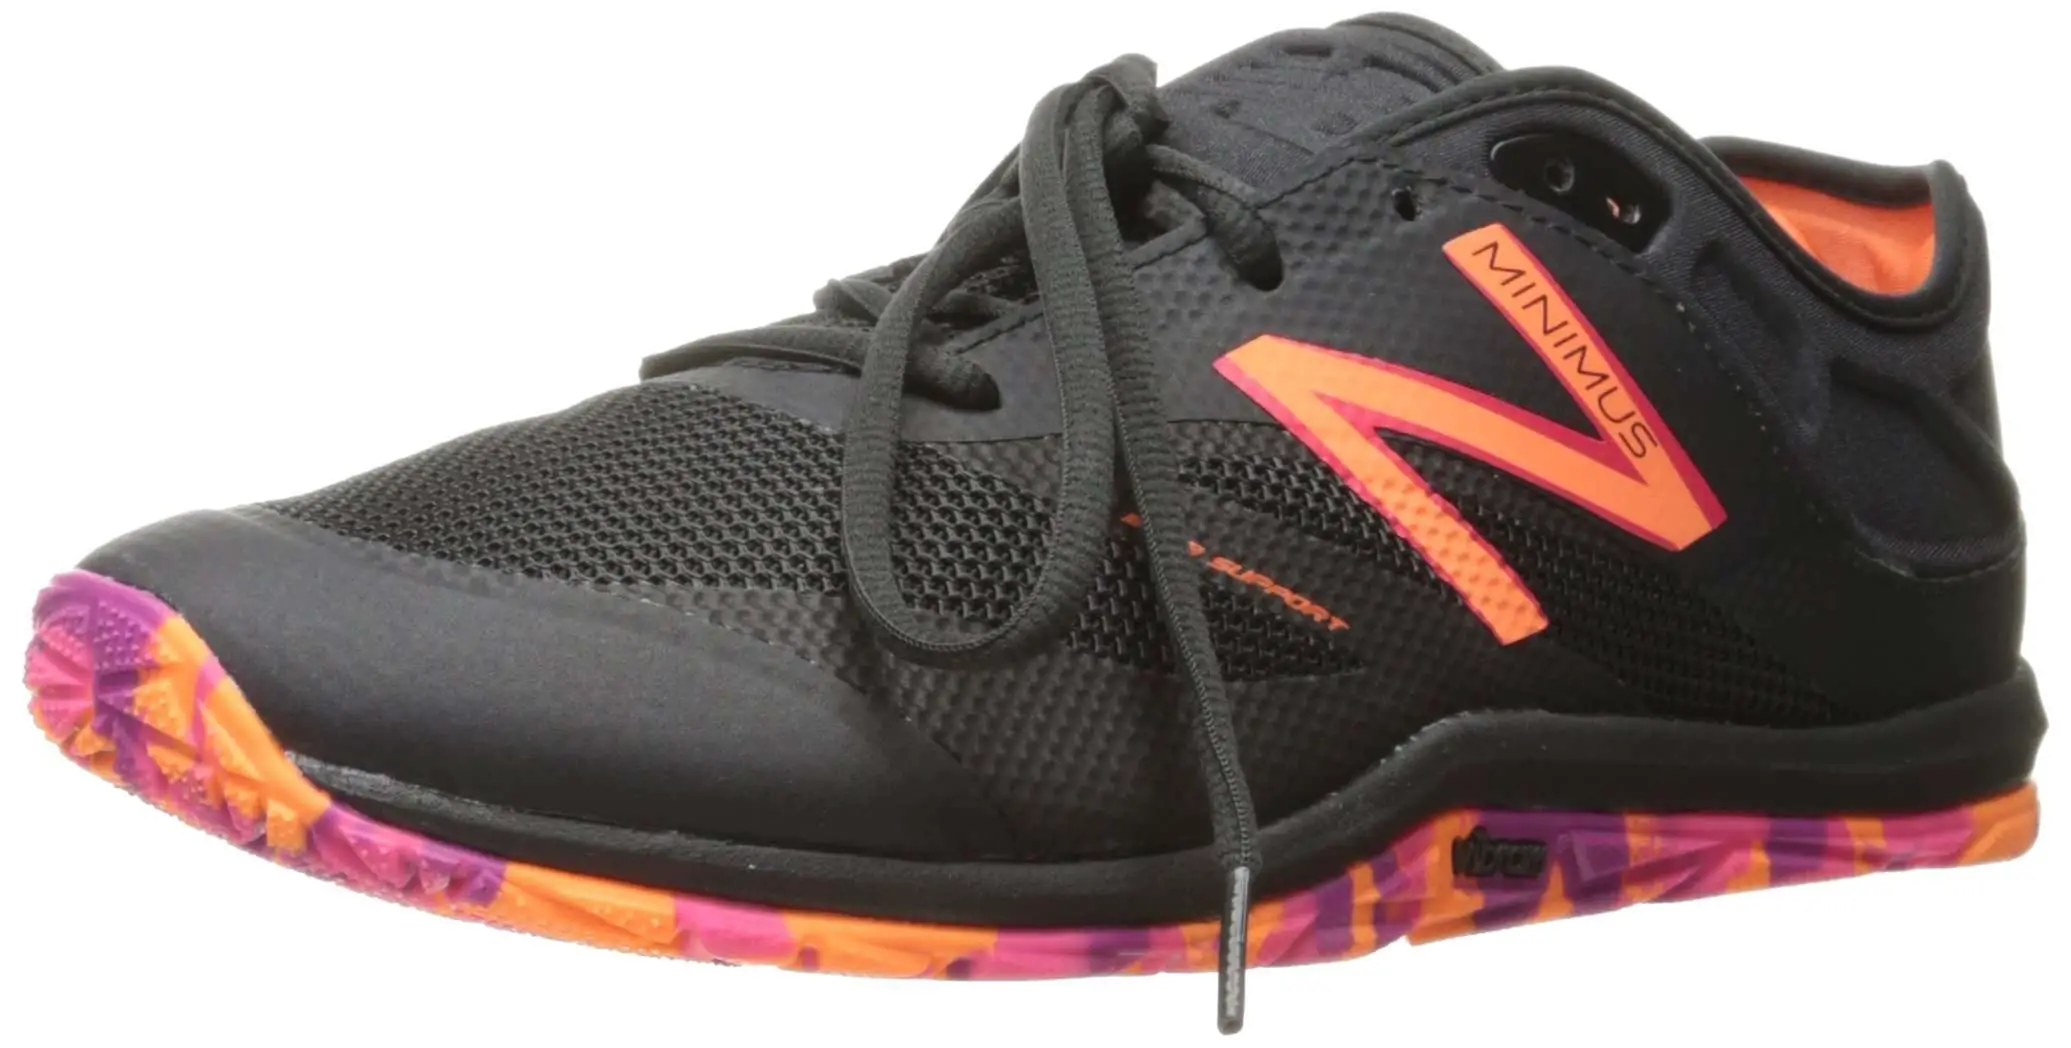 Top 7 Best Shoes for HIIT Workouts in 2019 Reviewed  Lehshoes